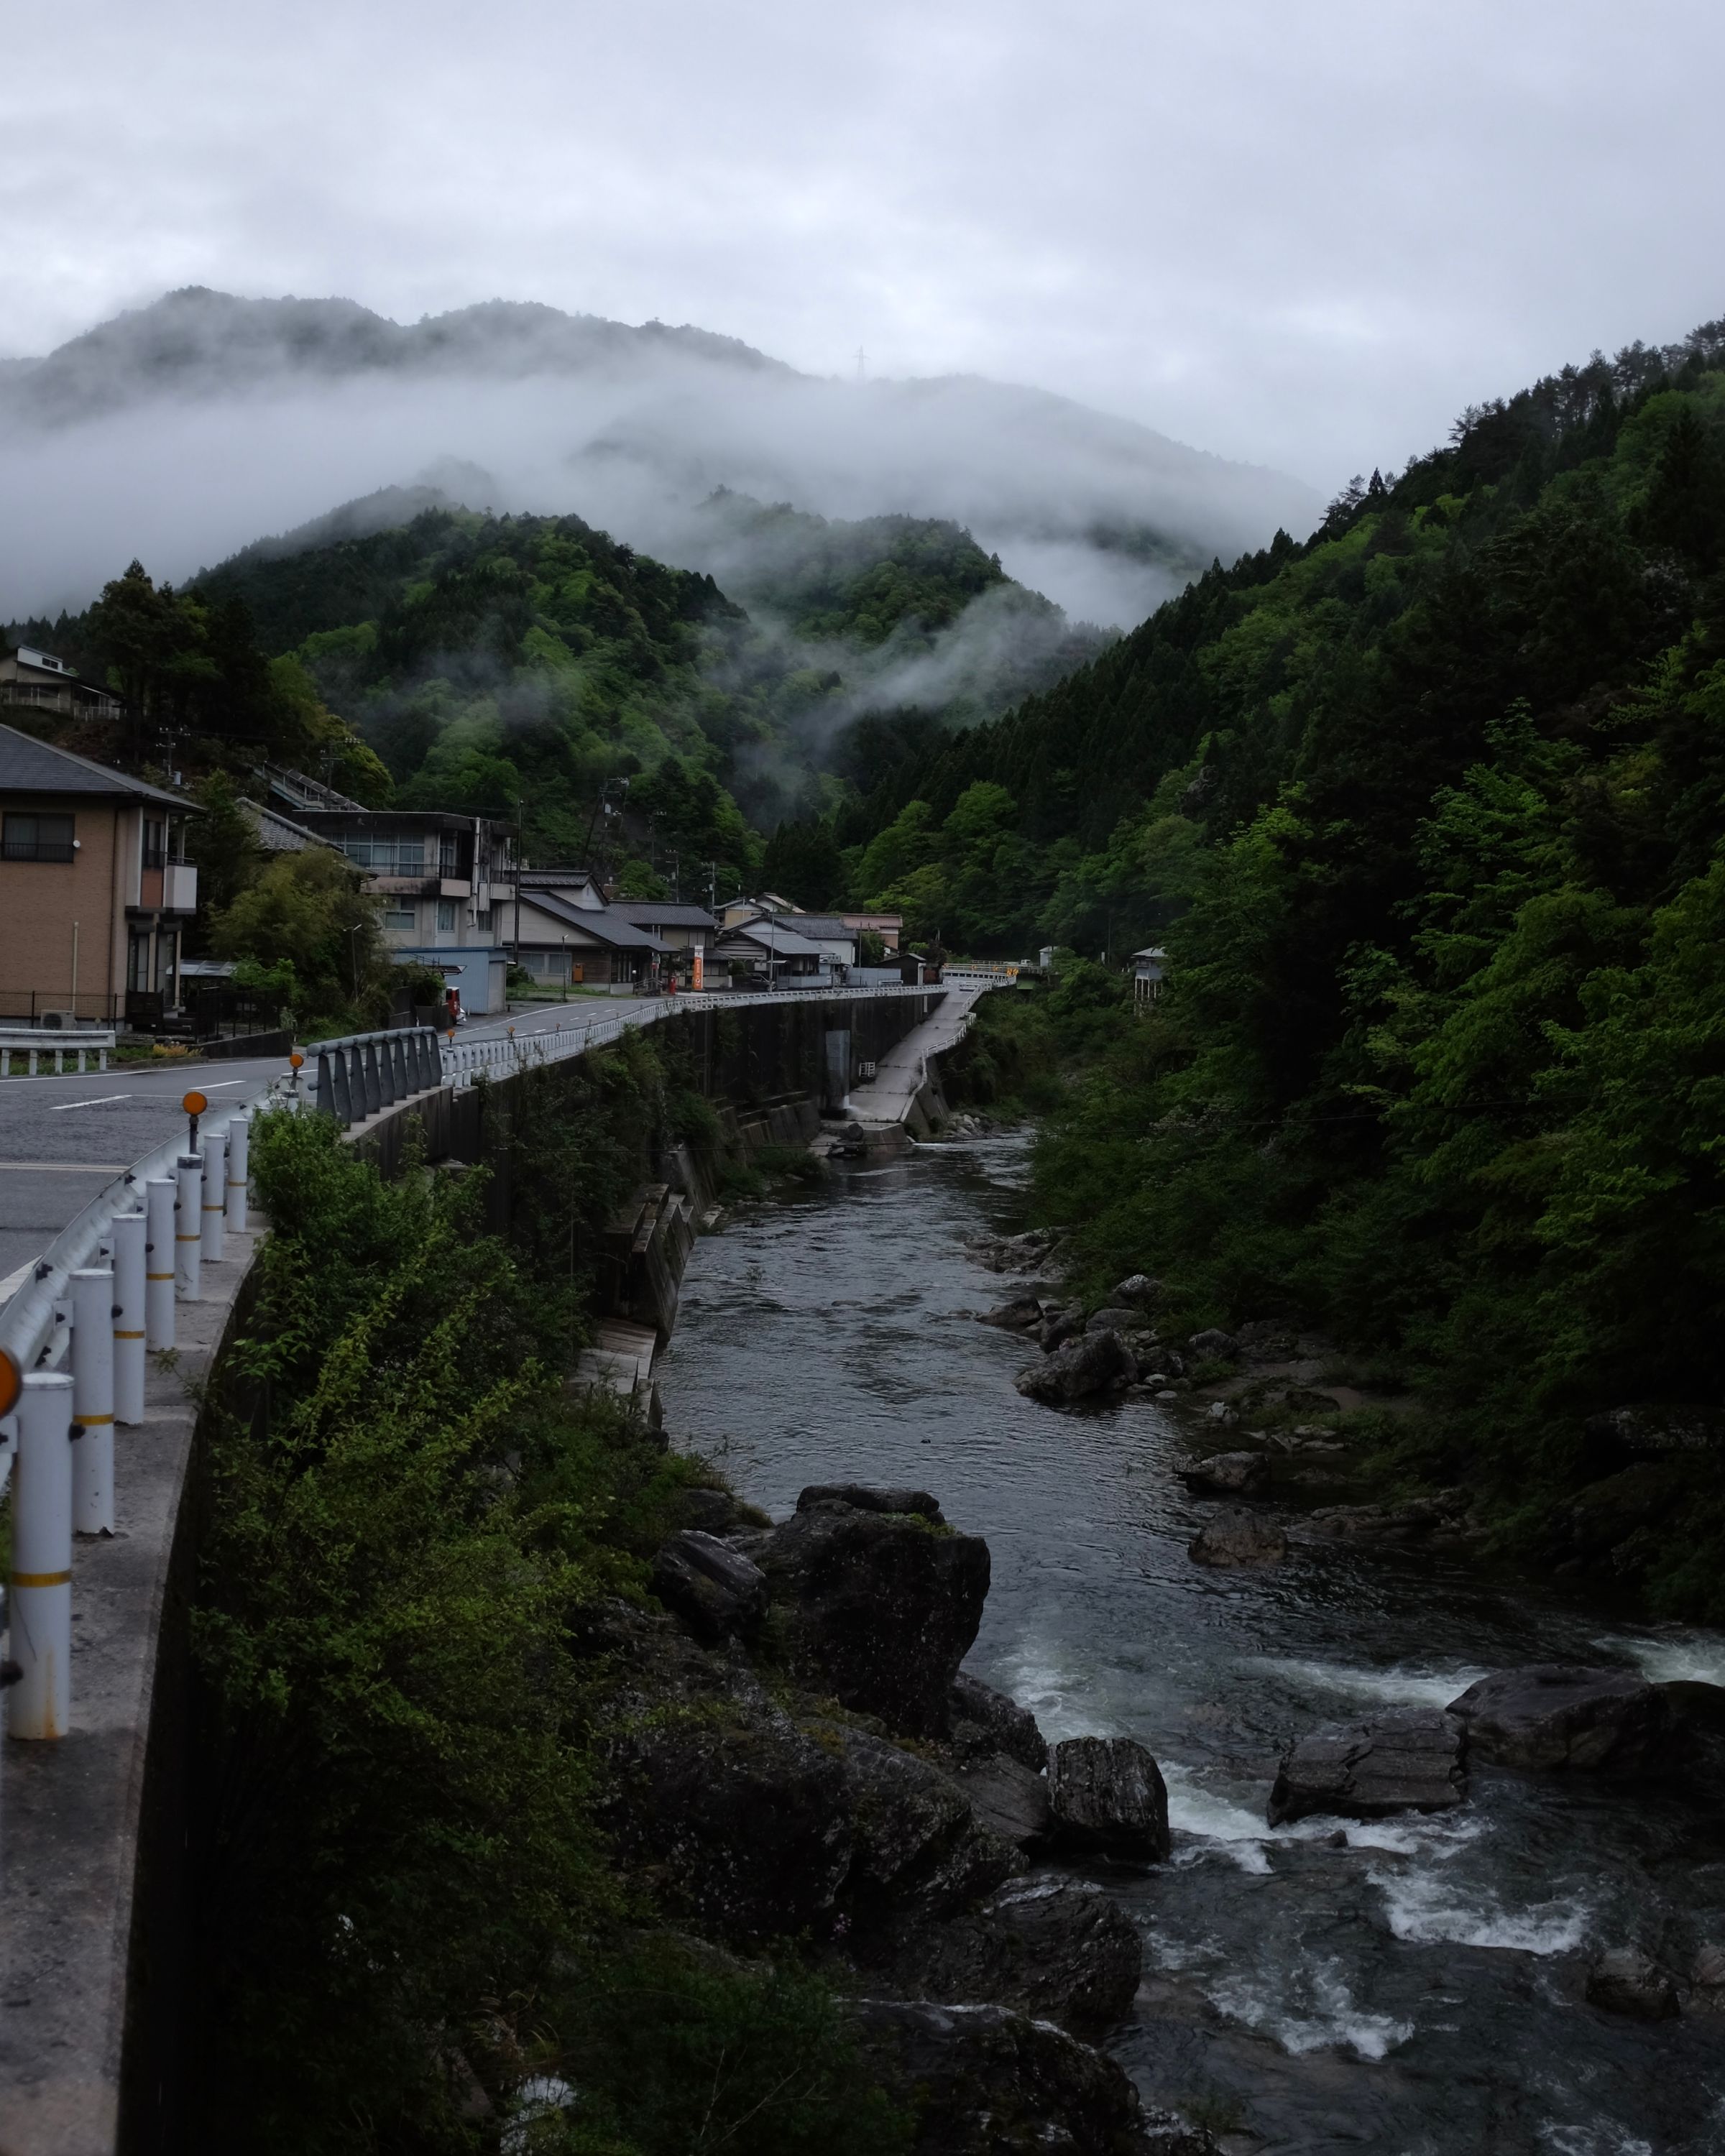 A mountain river runs by a village road, with misty, forested mountains in the background.